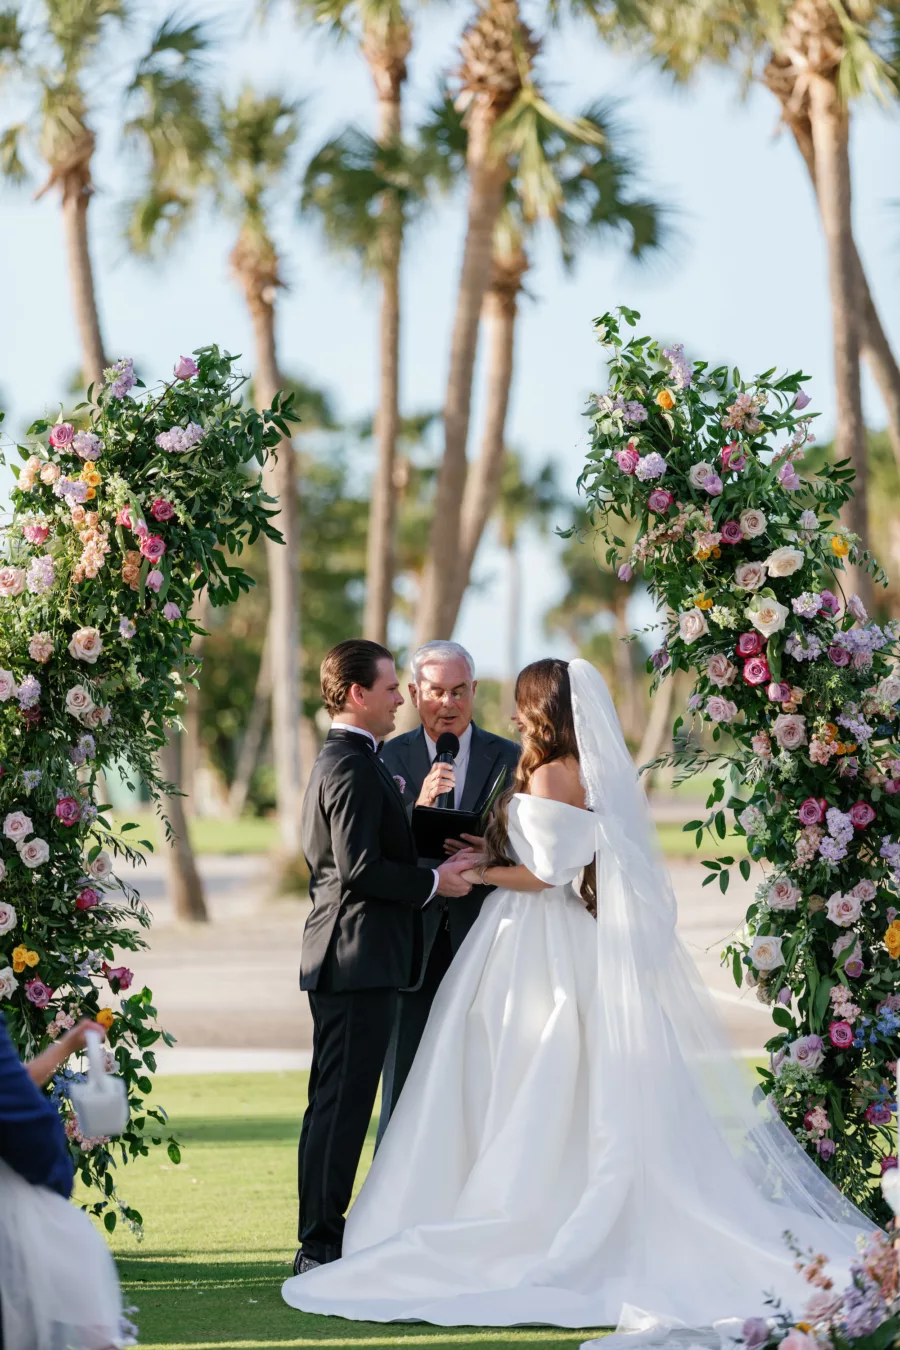 Bride and Groom Vow Exchange | Whimsical Pastel Wildflower Wedding Ceremony Arch Decor Inspiration